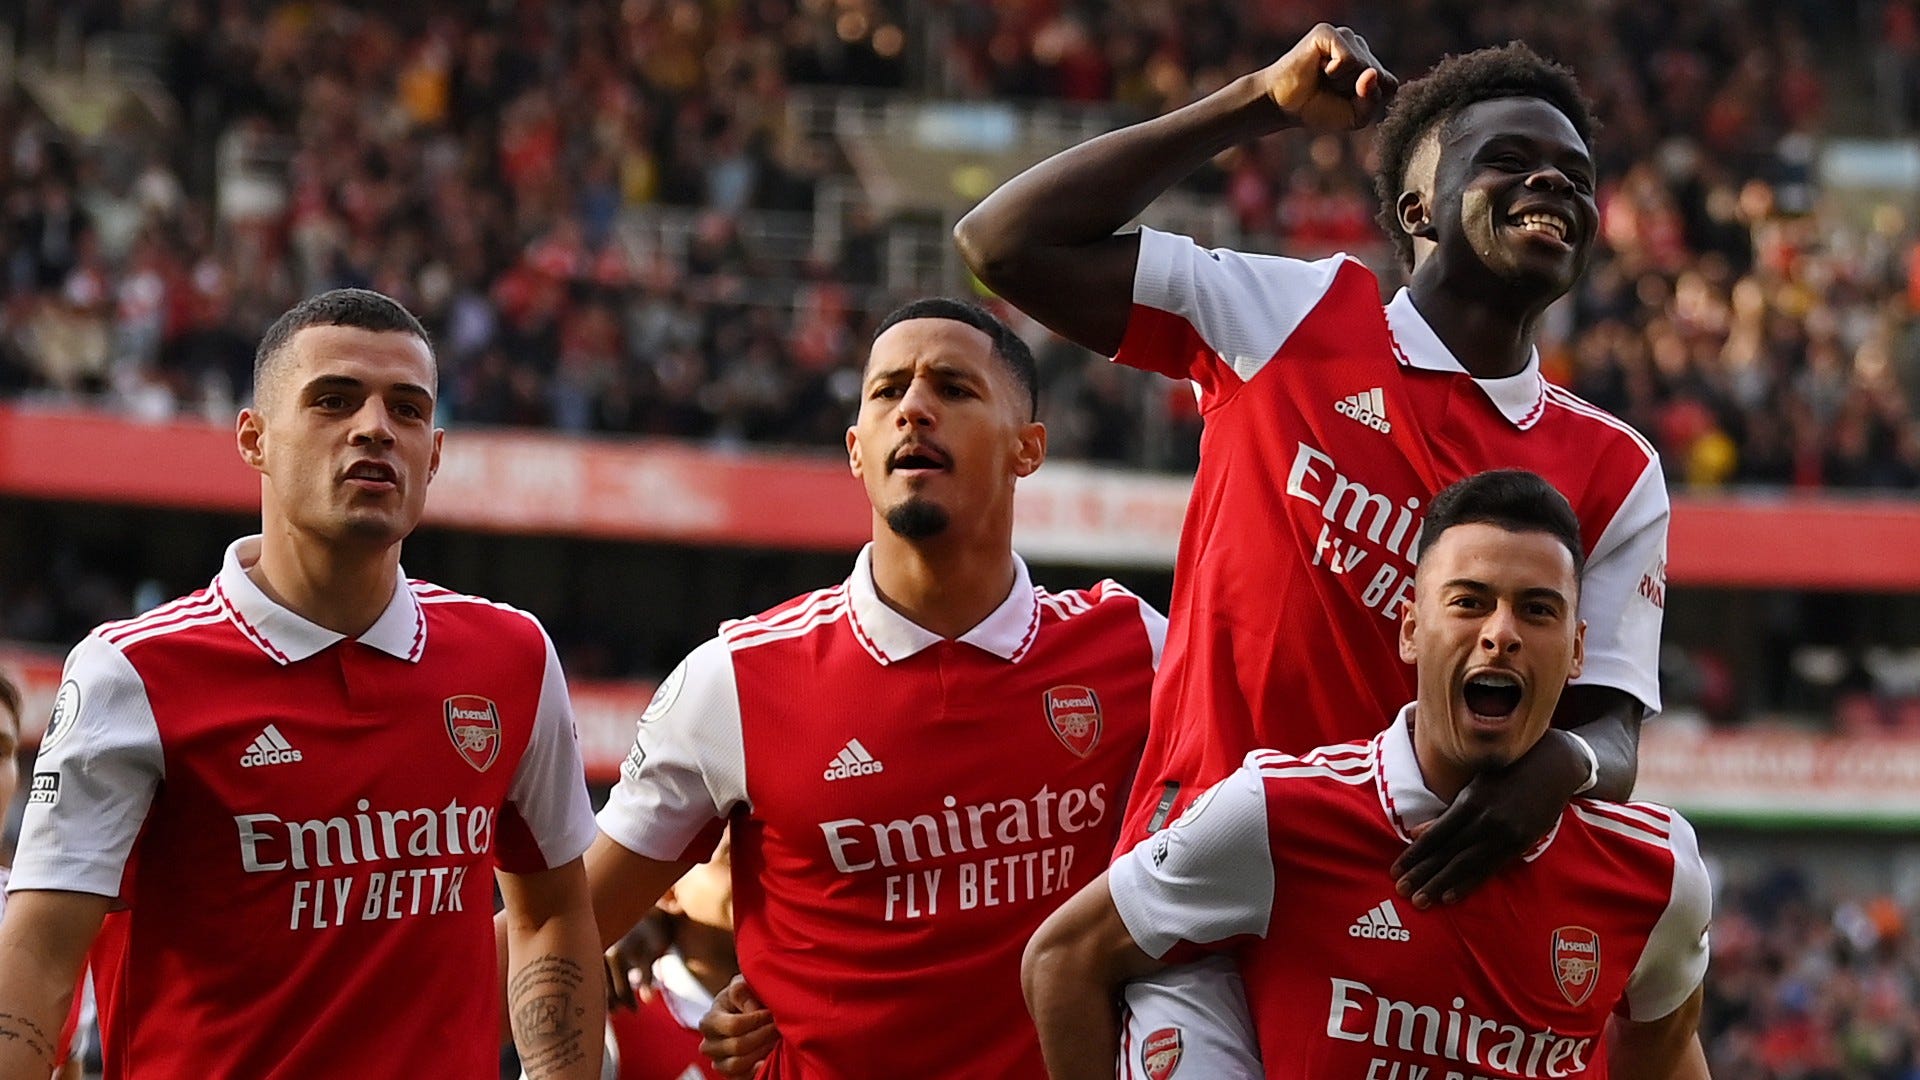 Leeds United vs Arsenal Live stream, TV channel, kick-off time and where to watch Goal UK